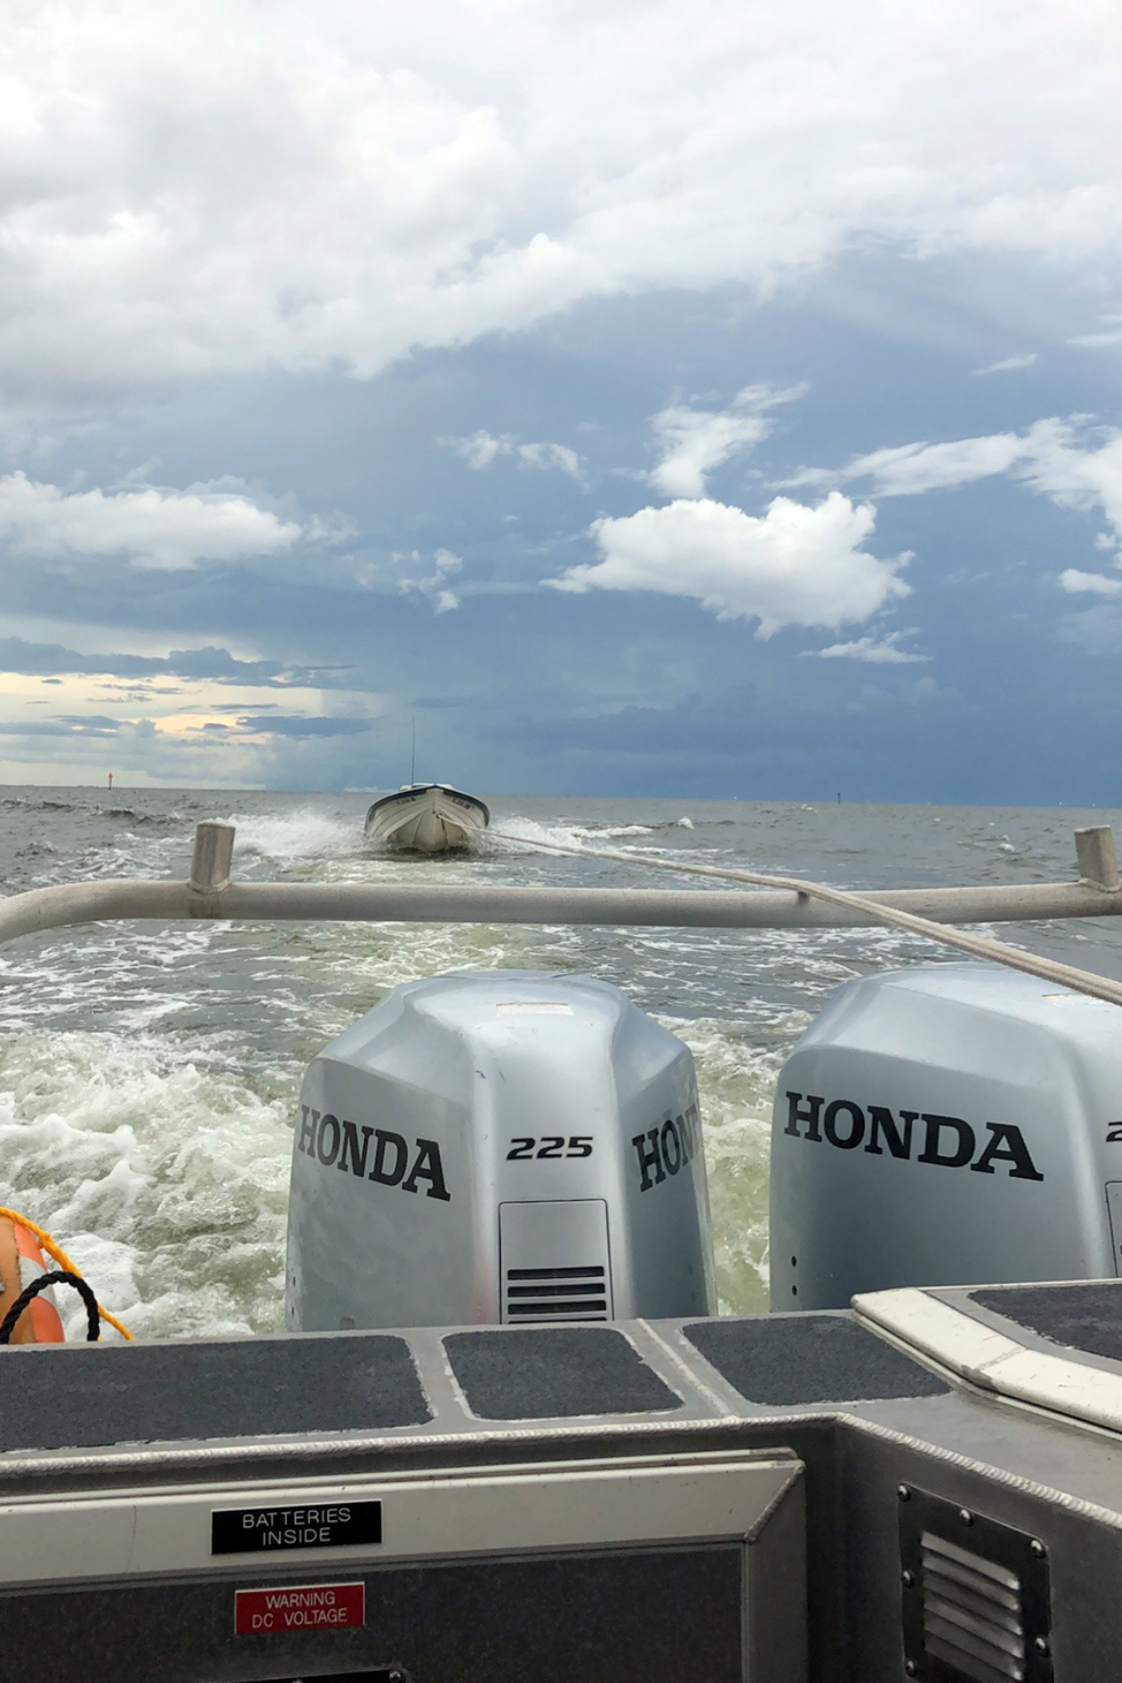 Coast Guard rescues person from water near Tampa Bay